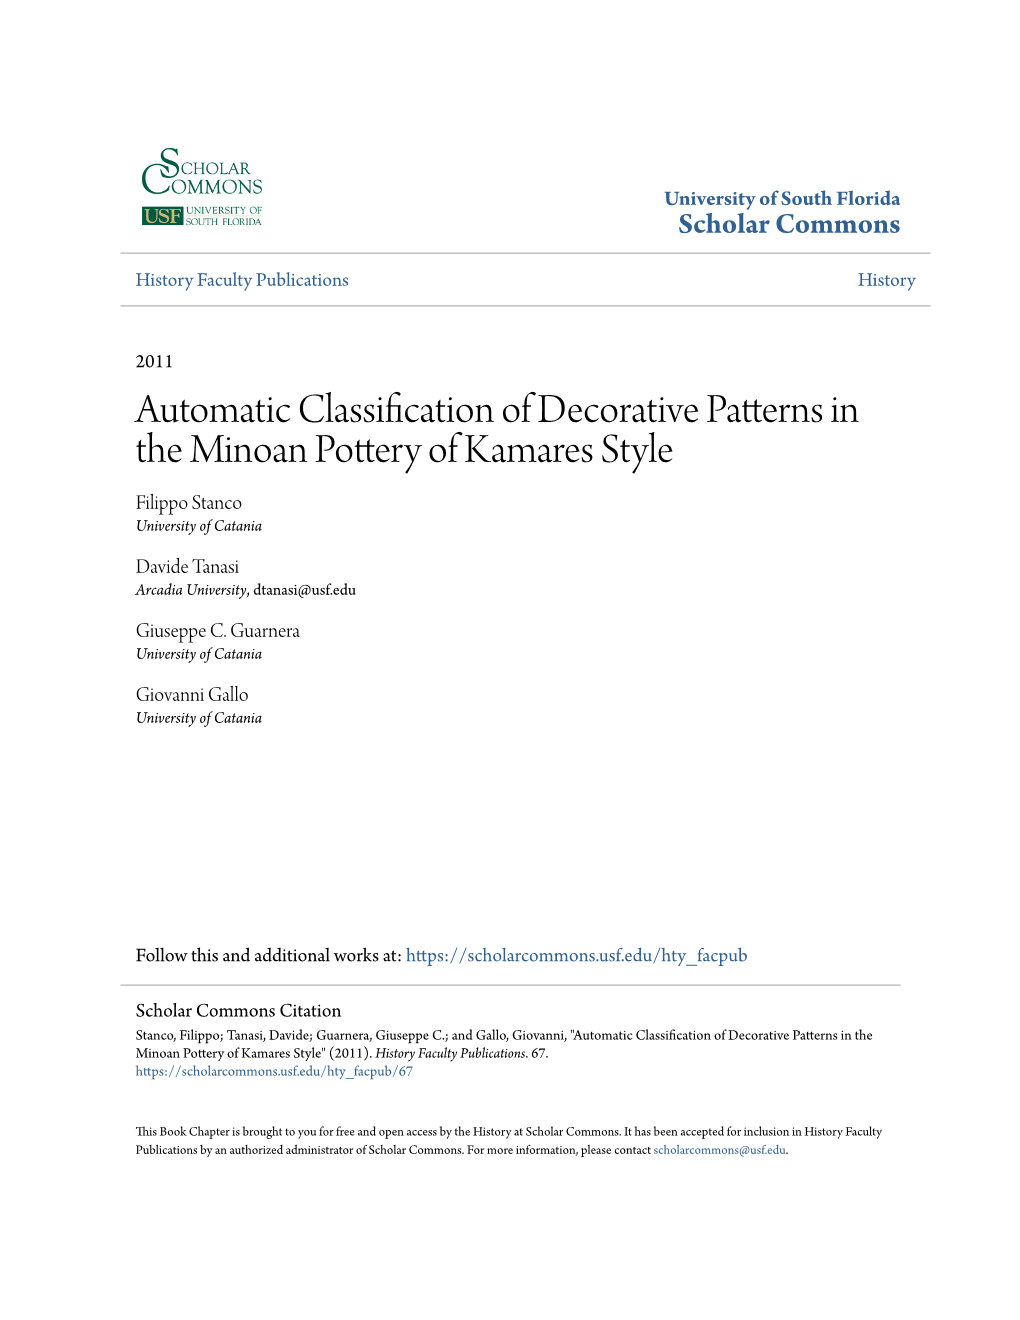 Automatic Classification of Decorative Patterns in the Minoan Pottery of Kamares Style Filippo Stanco University of Catania